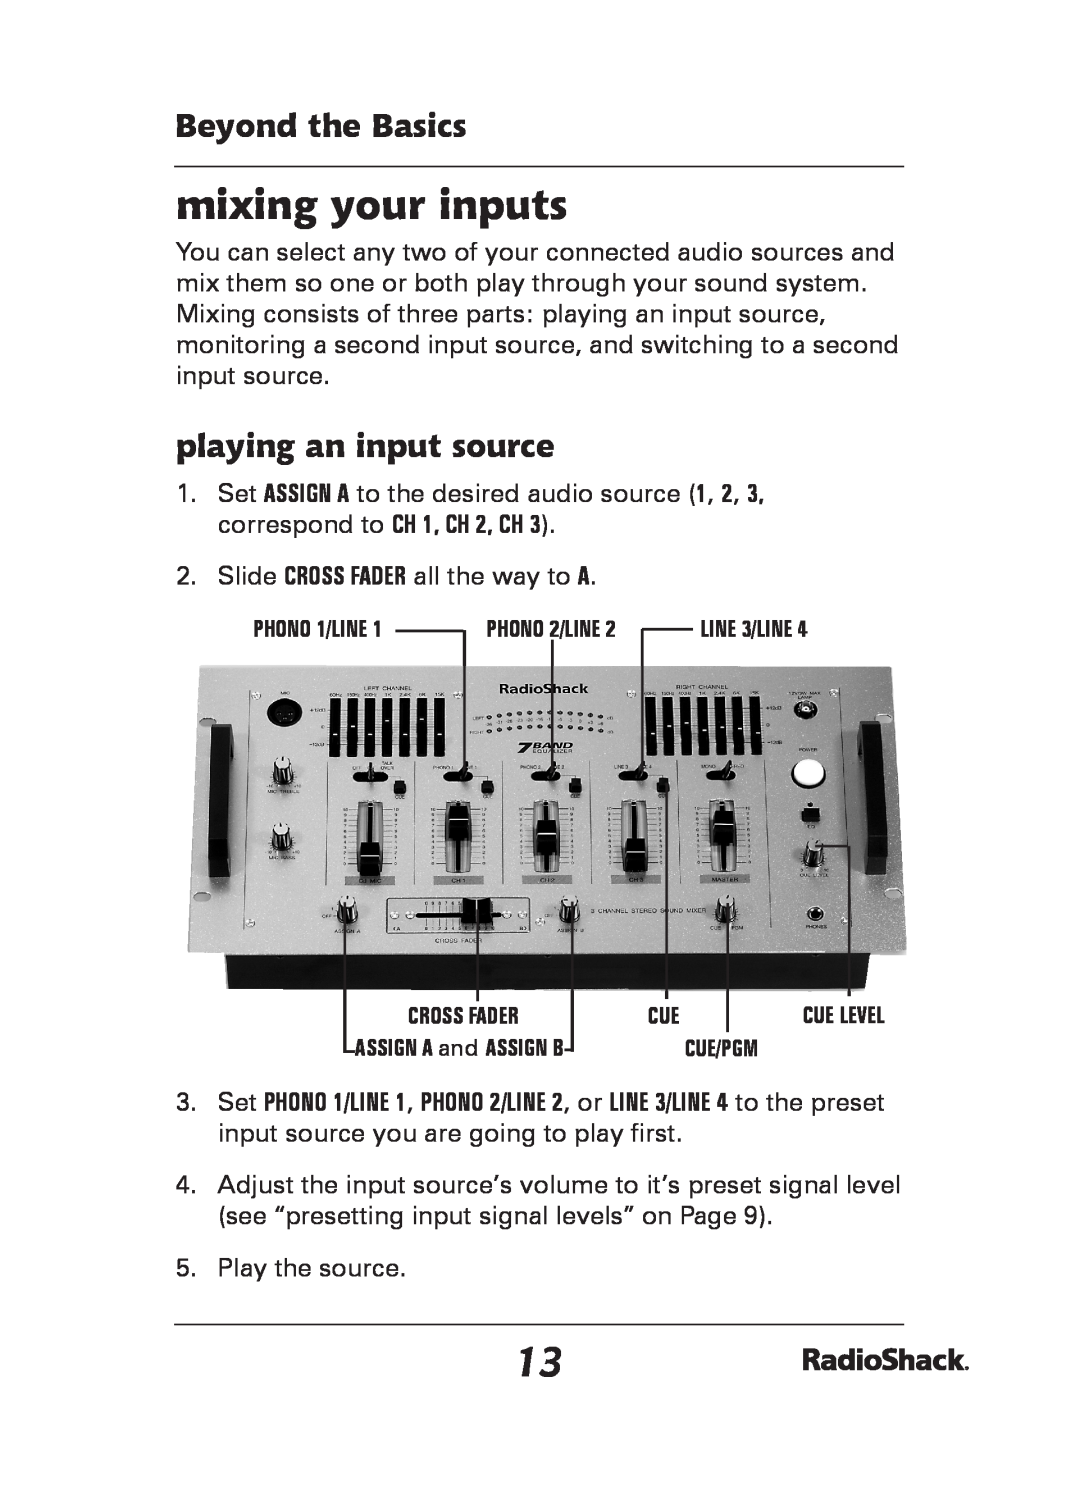 Radio Shack 32-2057 quick start mixing your inputs, Beyond the Basics, playing an input source 